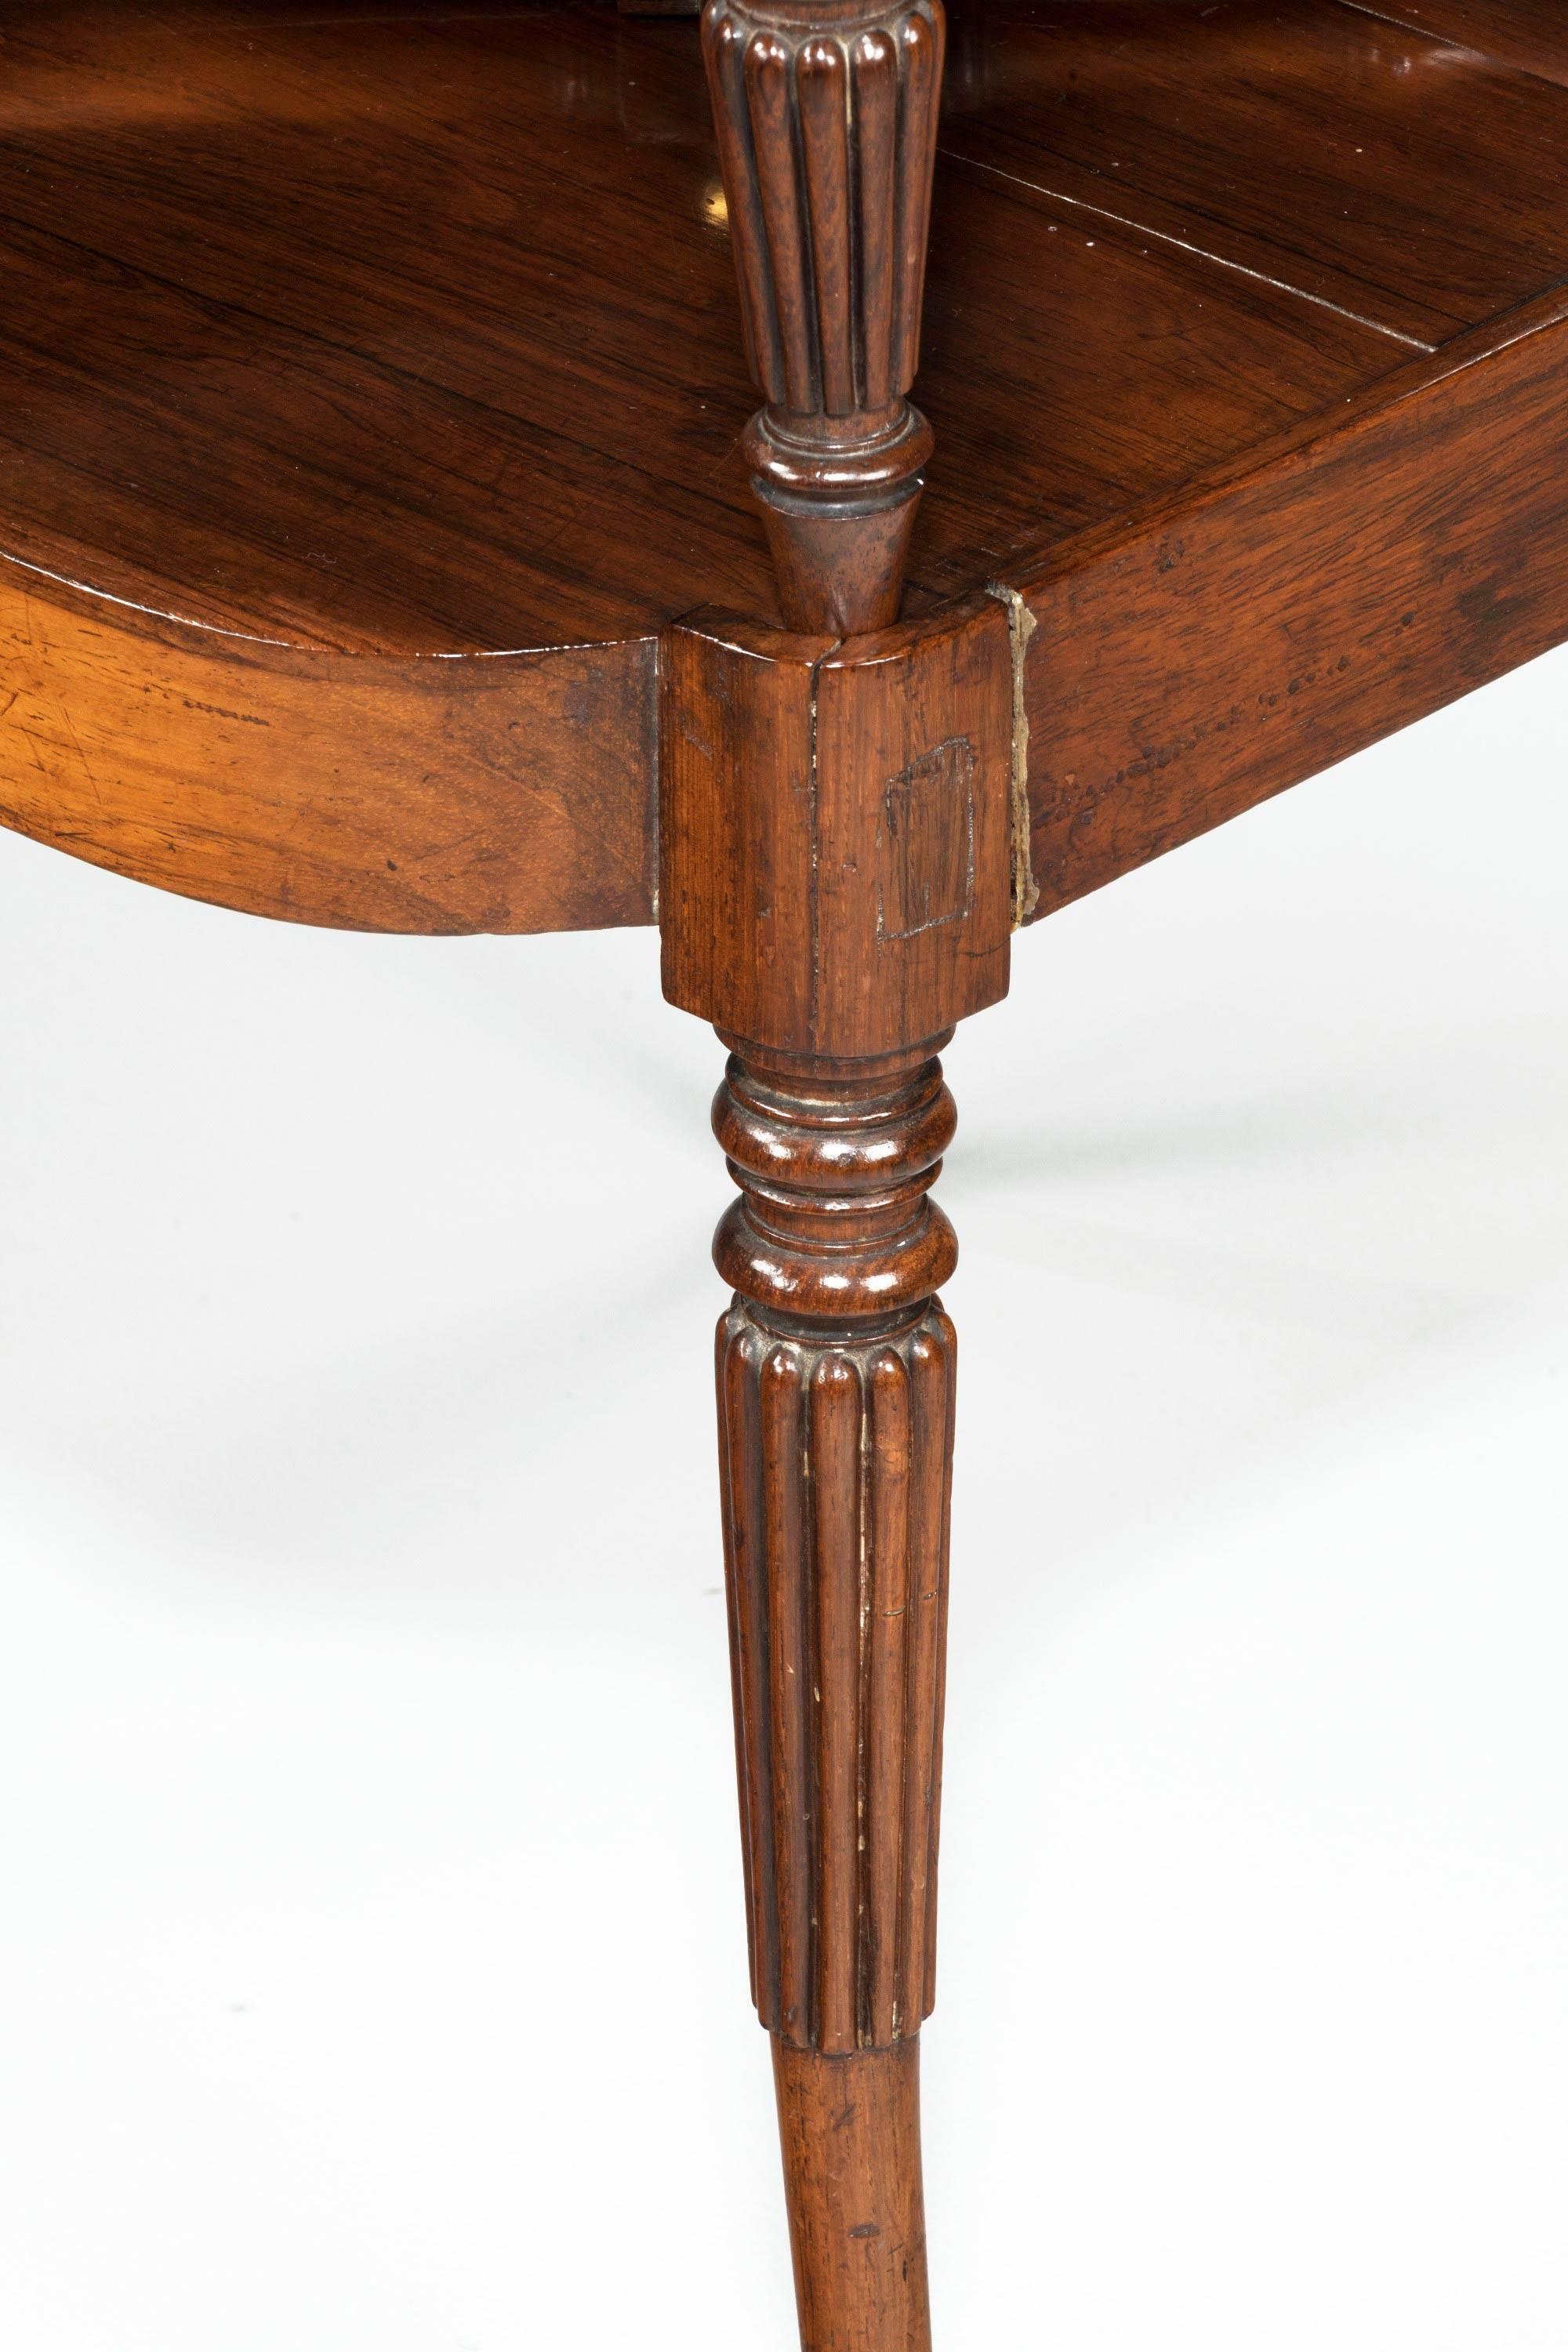 Regency Period Child's Chair on Stand 1